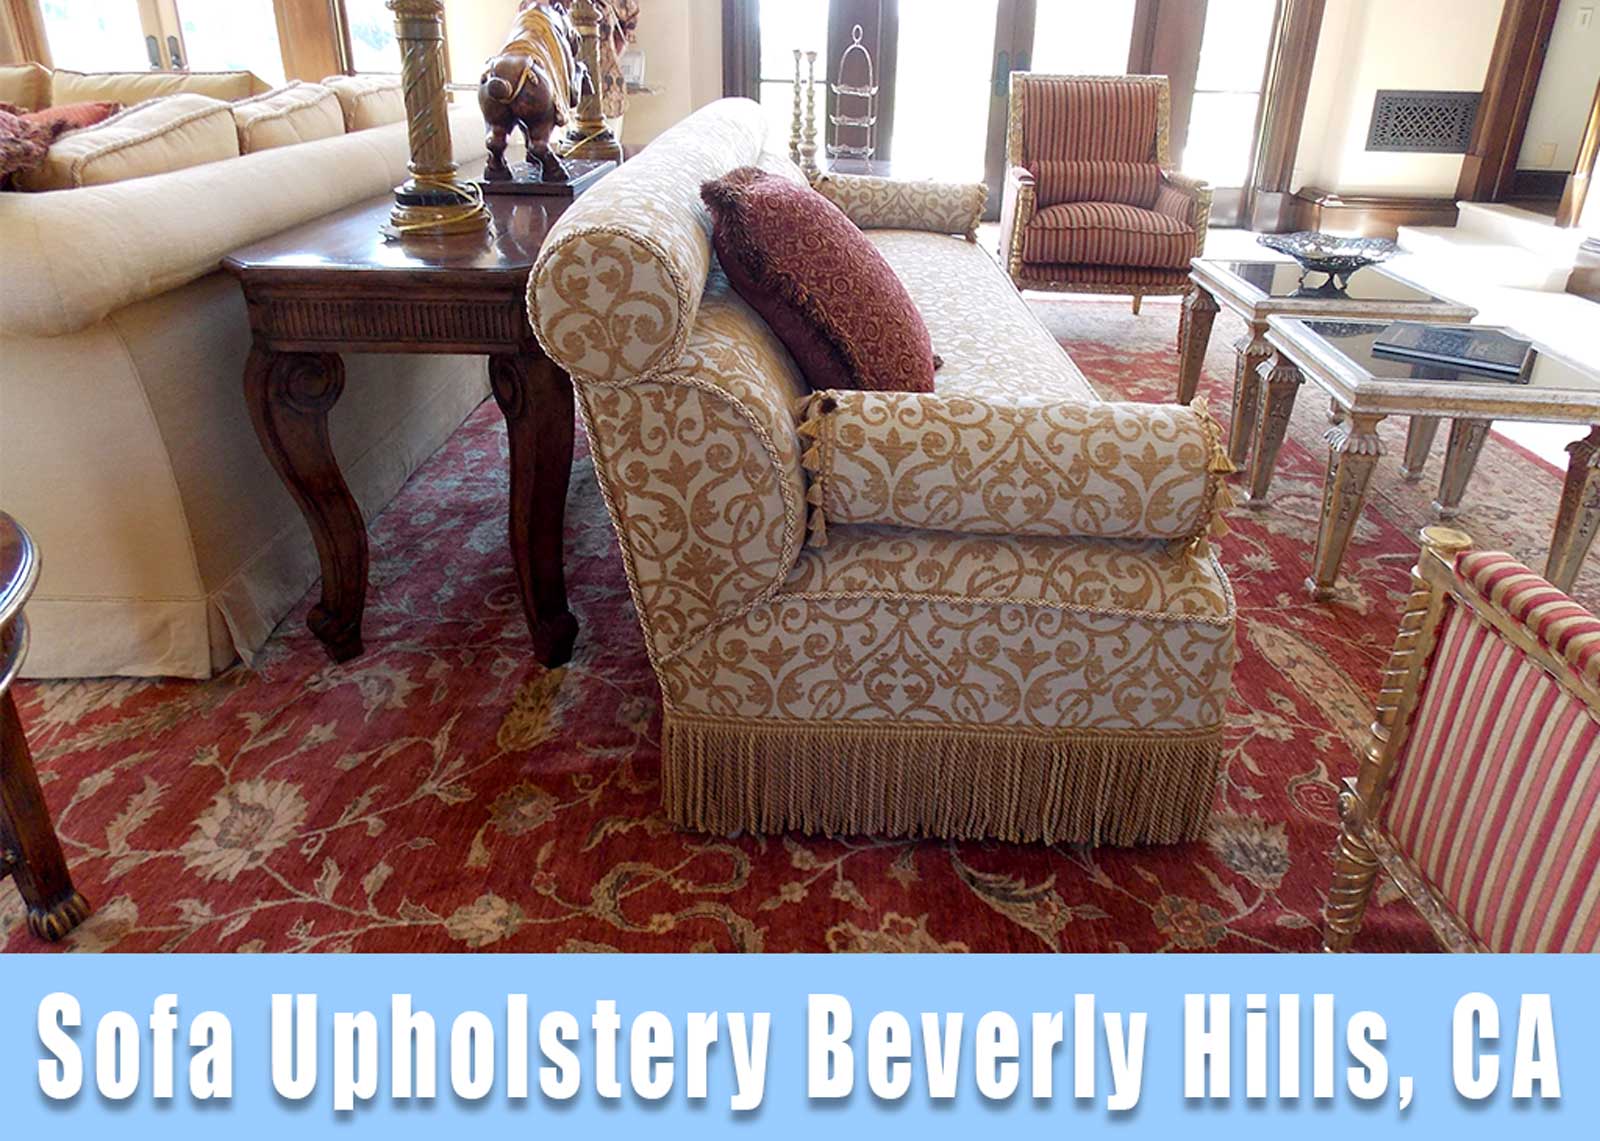 Sofa upholstery Beverly Hills California. Custom mad sofas in Beverly Hills CA.